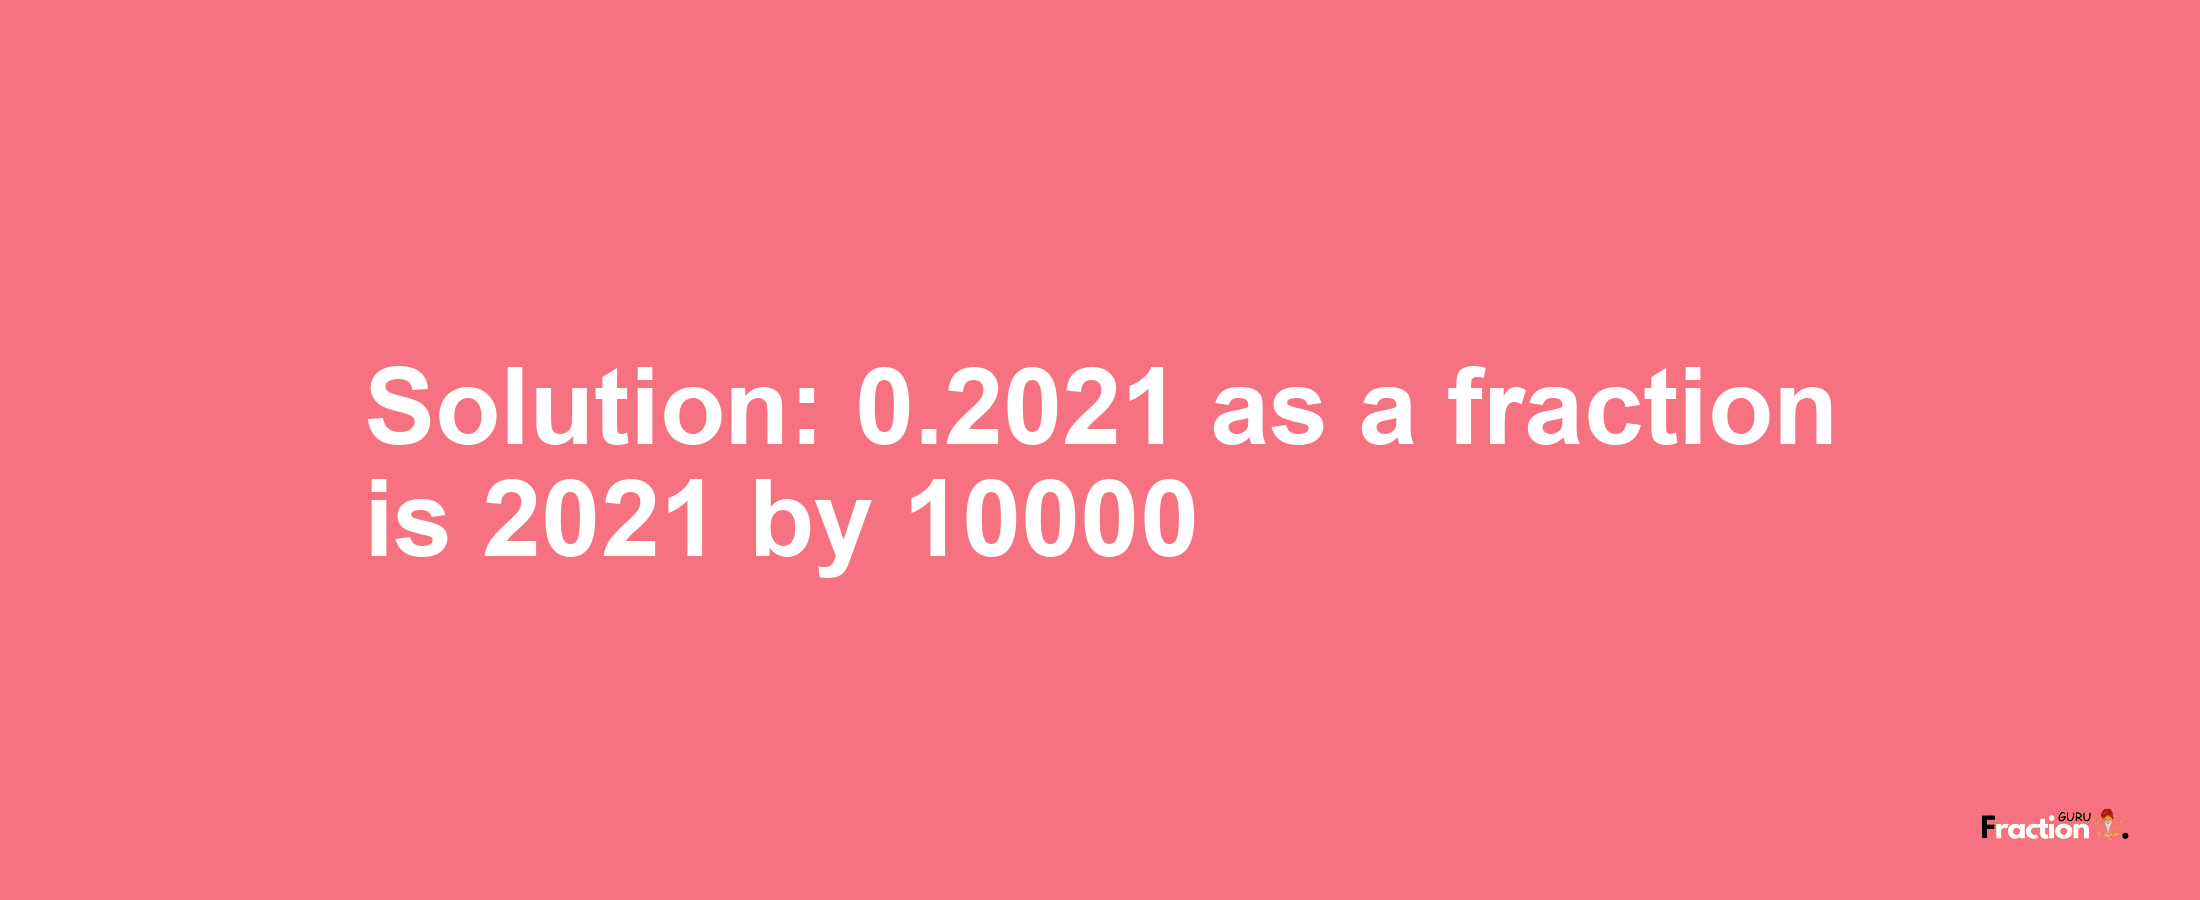 Solution:0.2021 as a fraction is 2021/10000